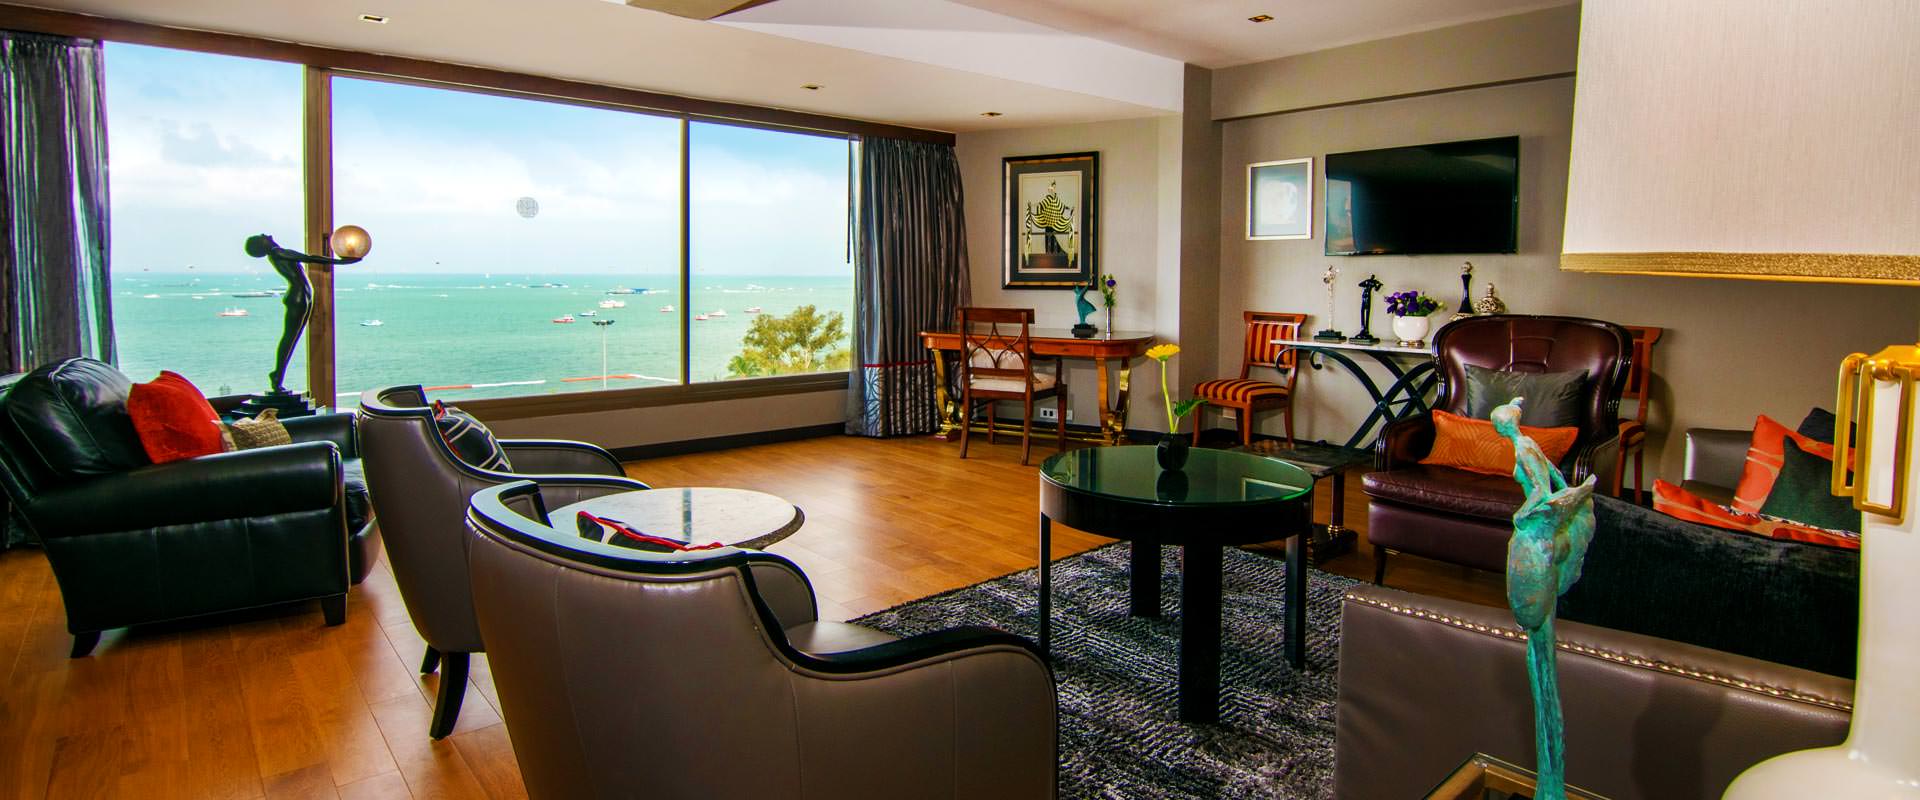 Deluxe Deco Suite at The Bayview Hotel Pattaya